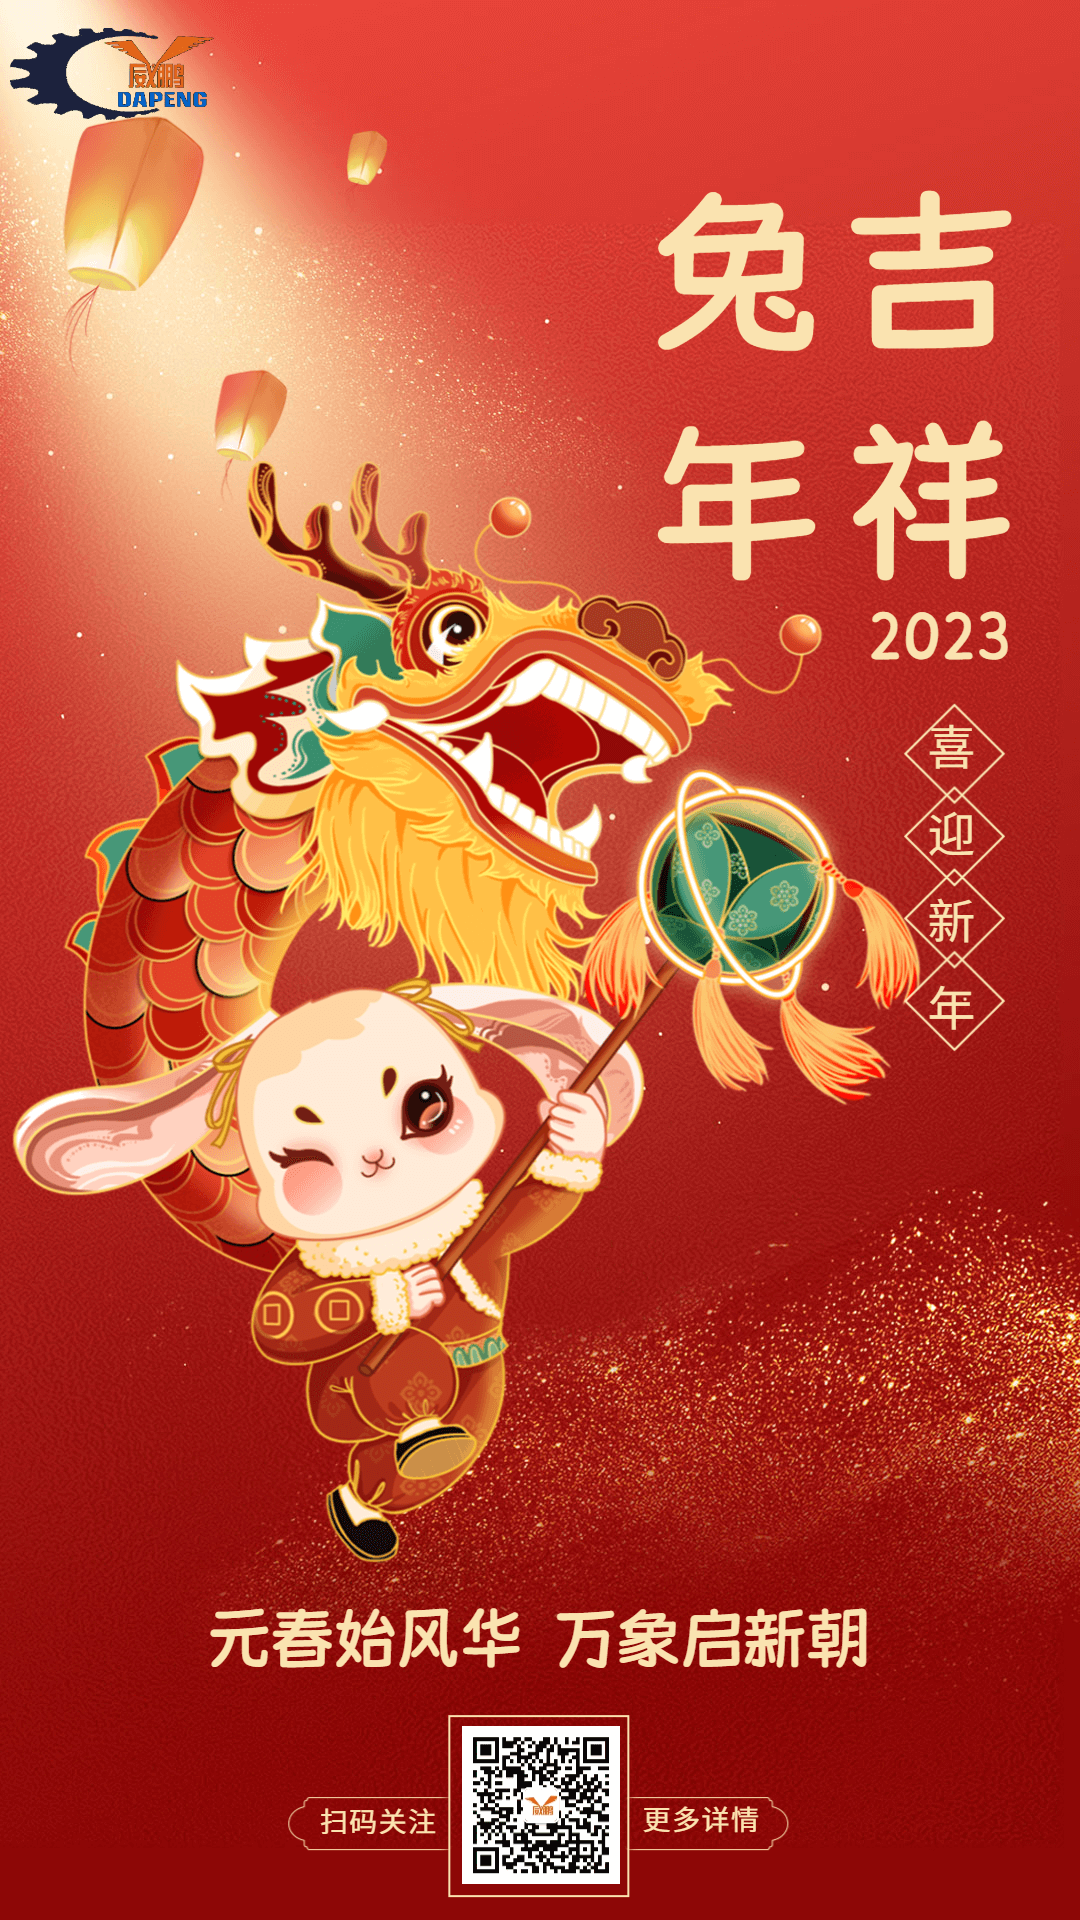 Dapeng printing machine 2023 New Year's greeting: hills in sight, but period in the future